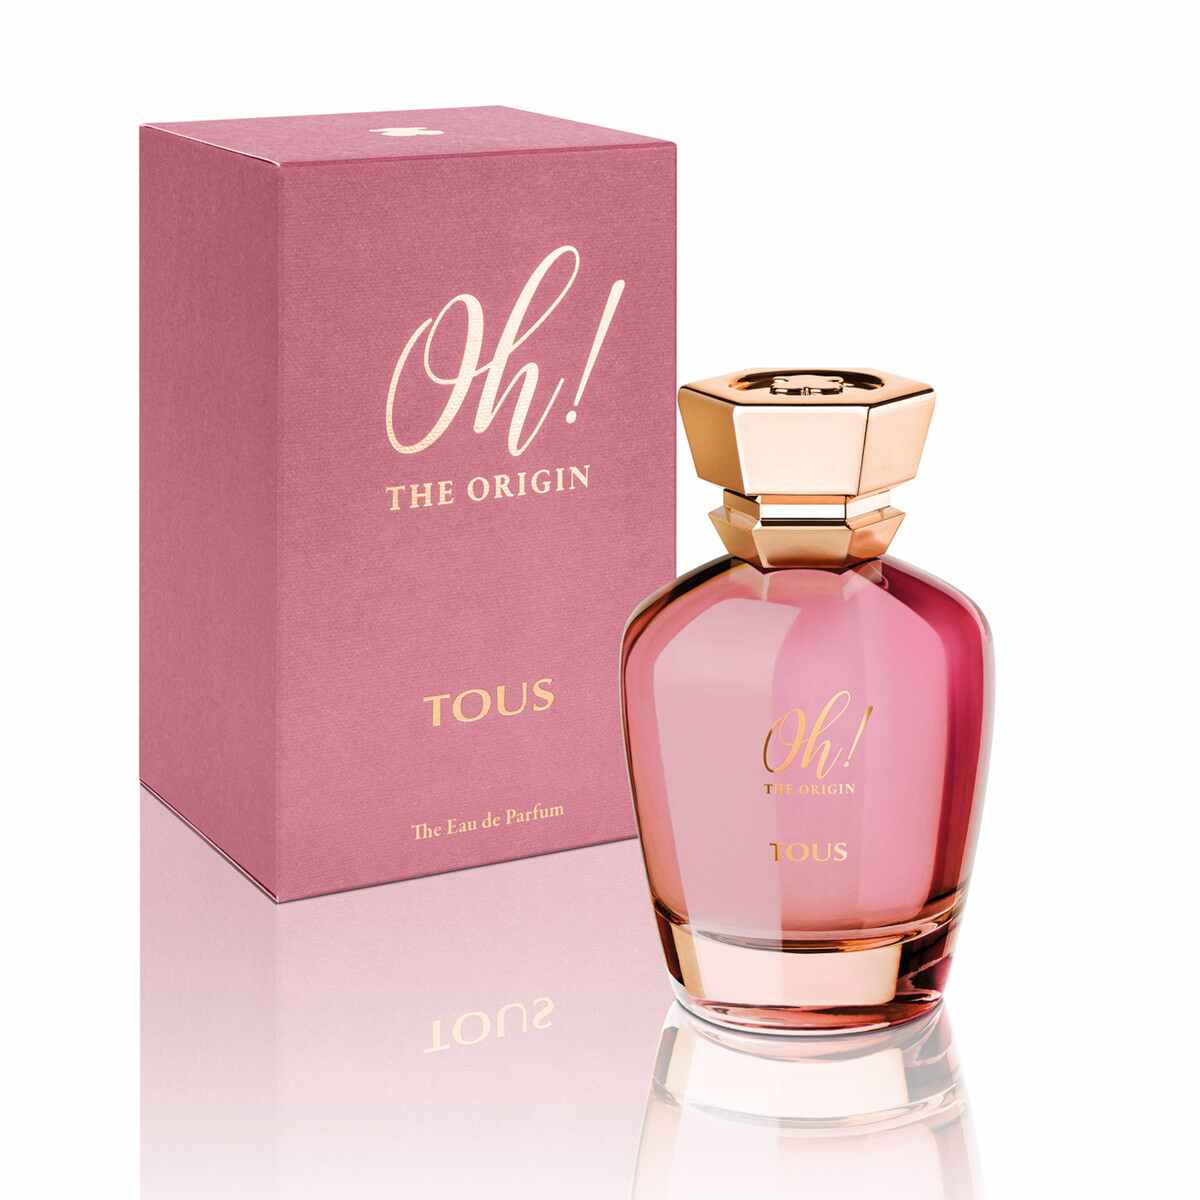 Oh! The Origin by Tous